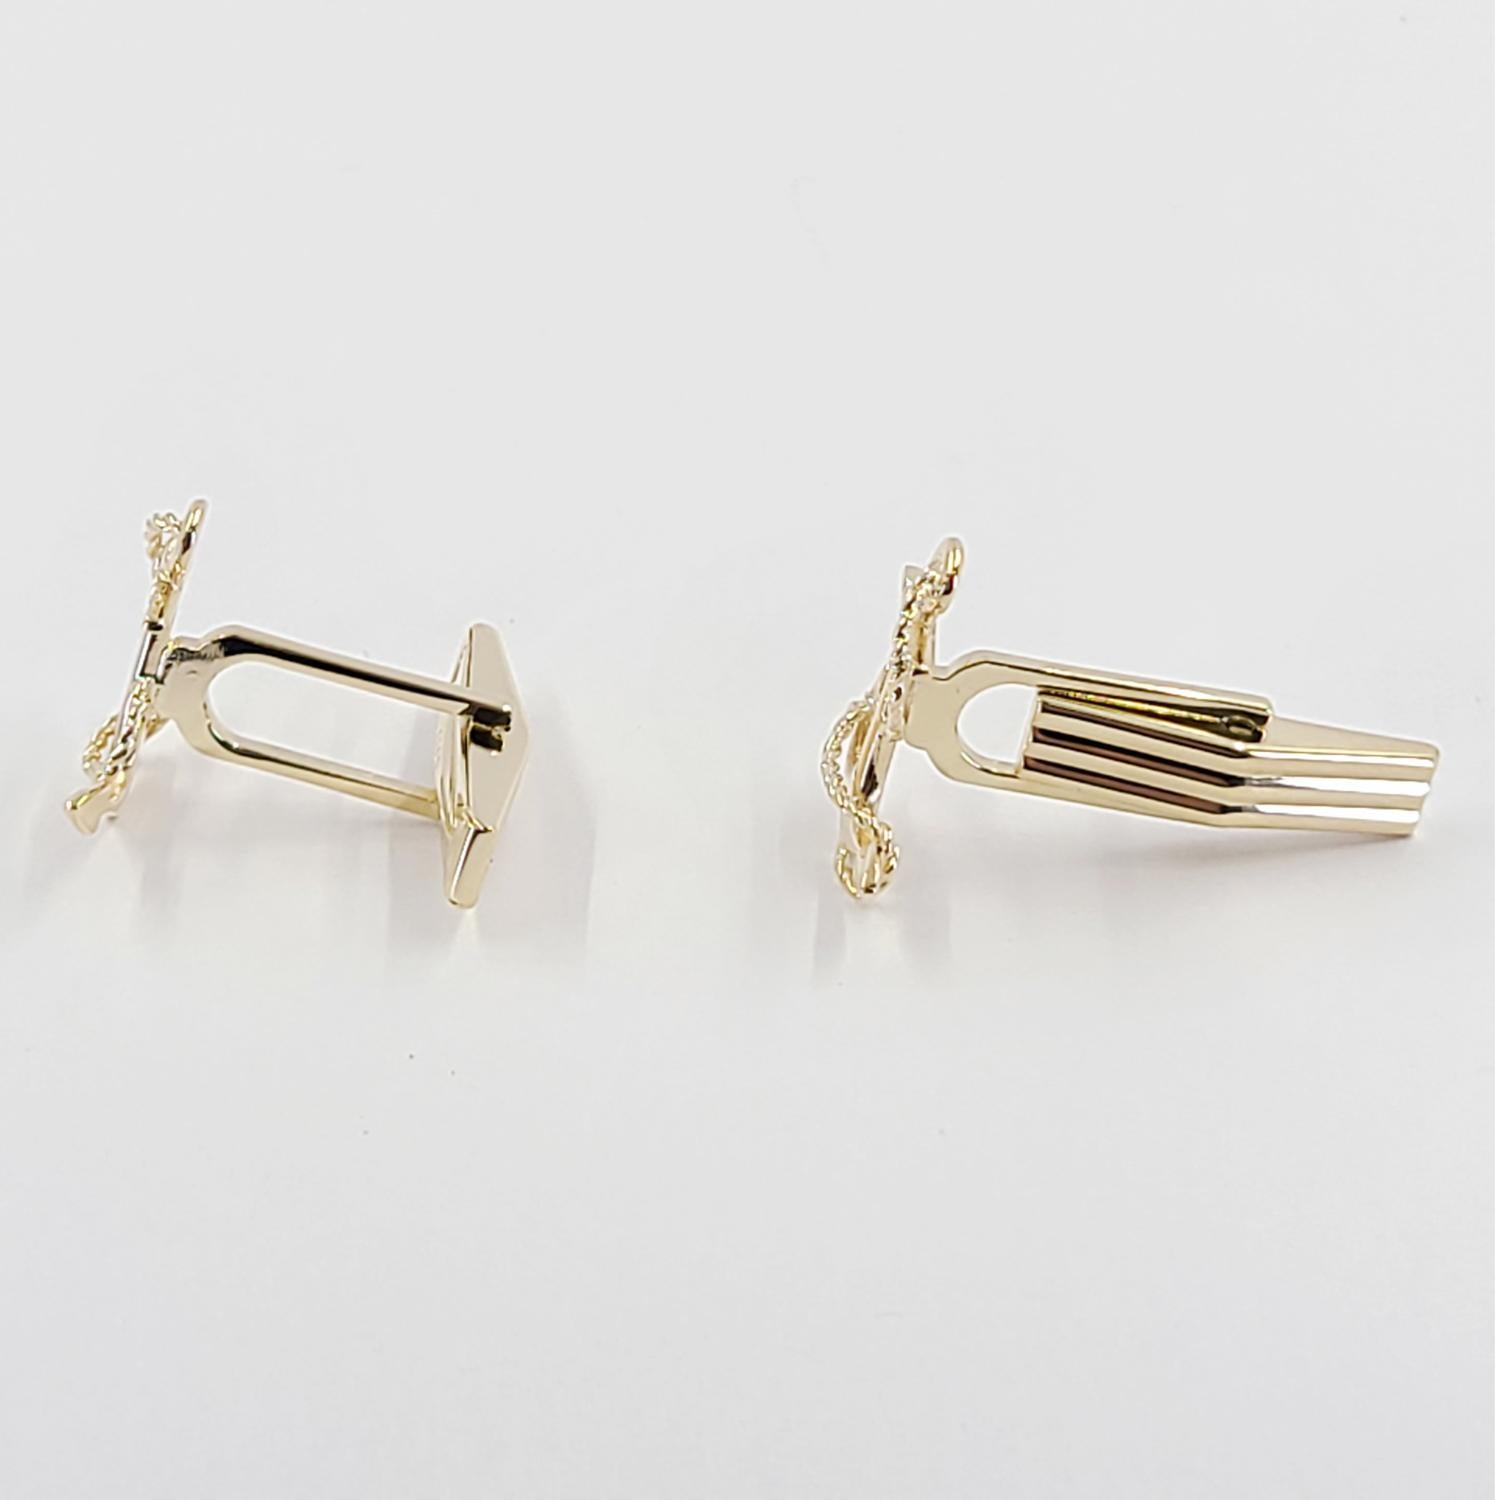 Yellow Gold Rope and Anchor Cufflinks In Good Condition For Sale In Coral Gables, FL